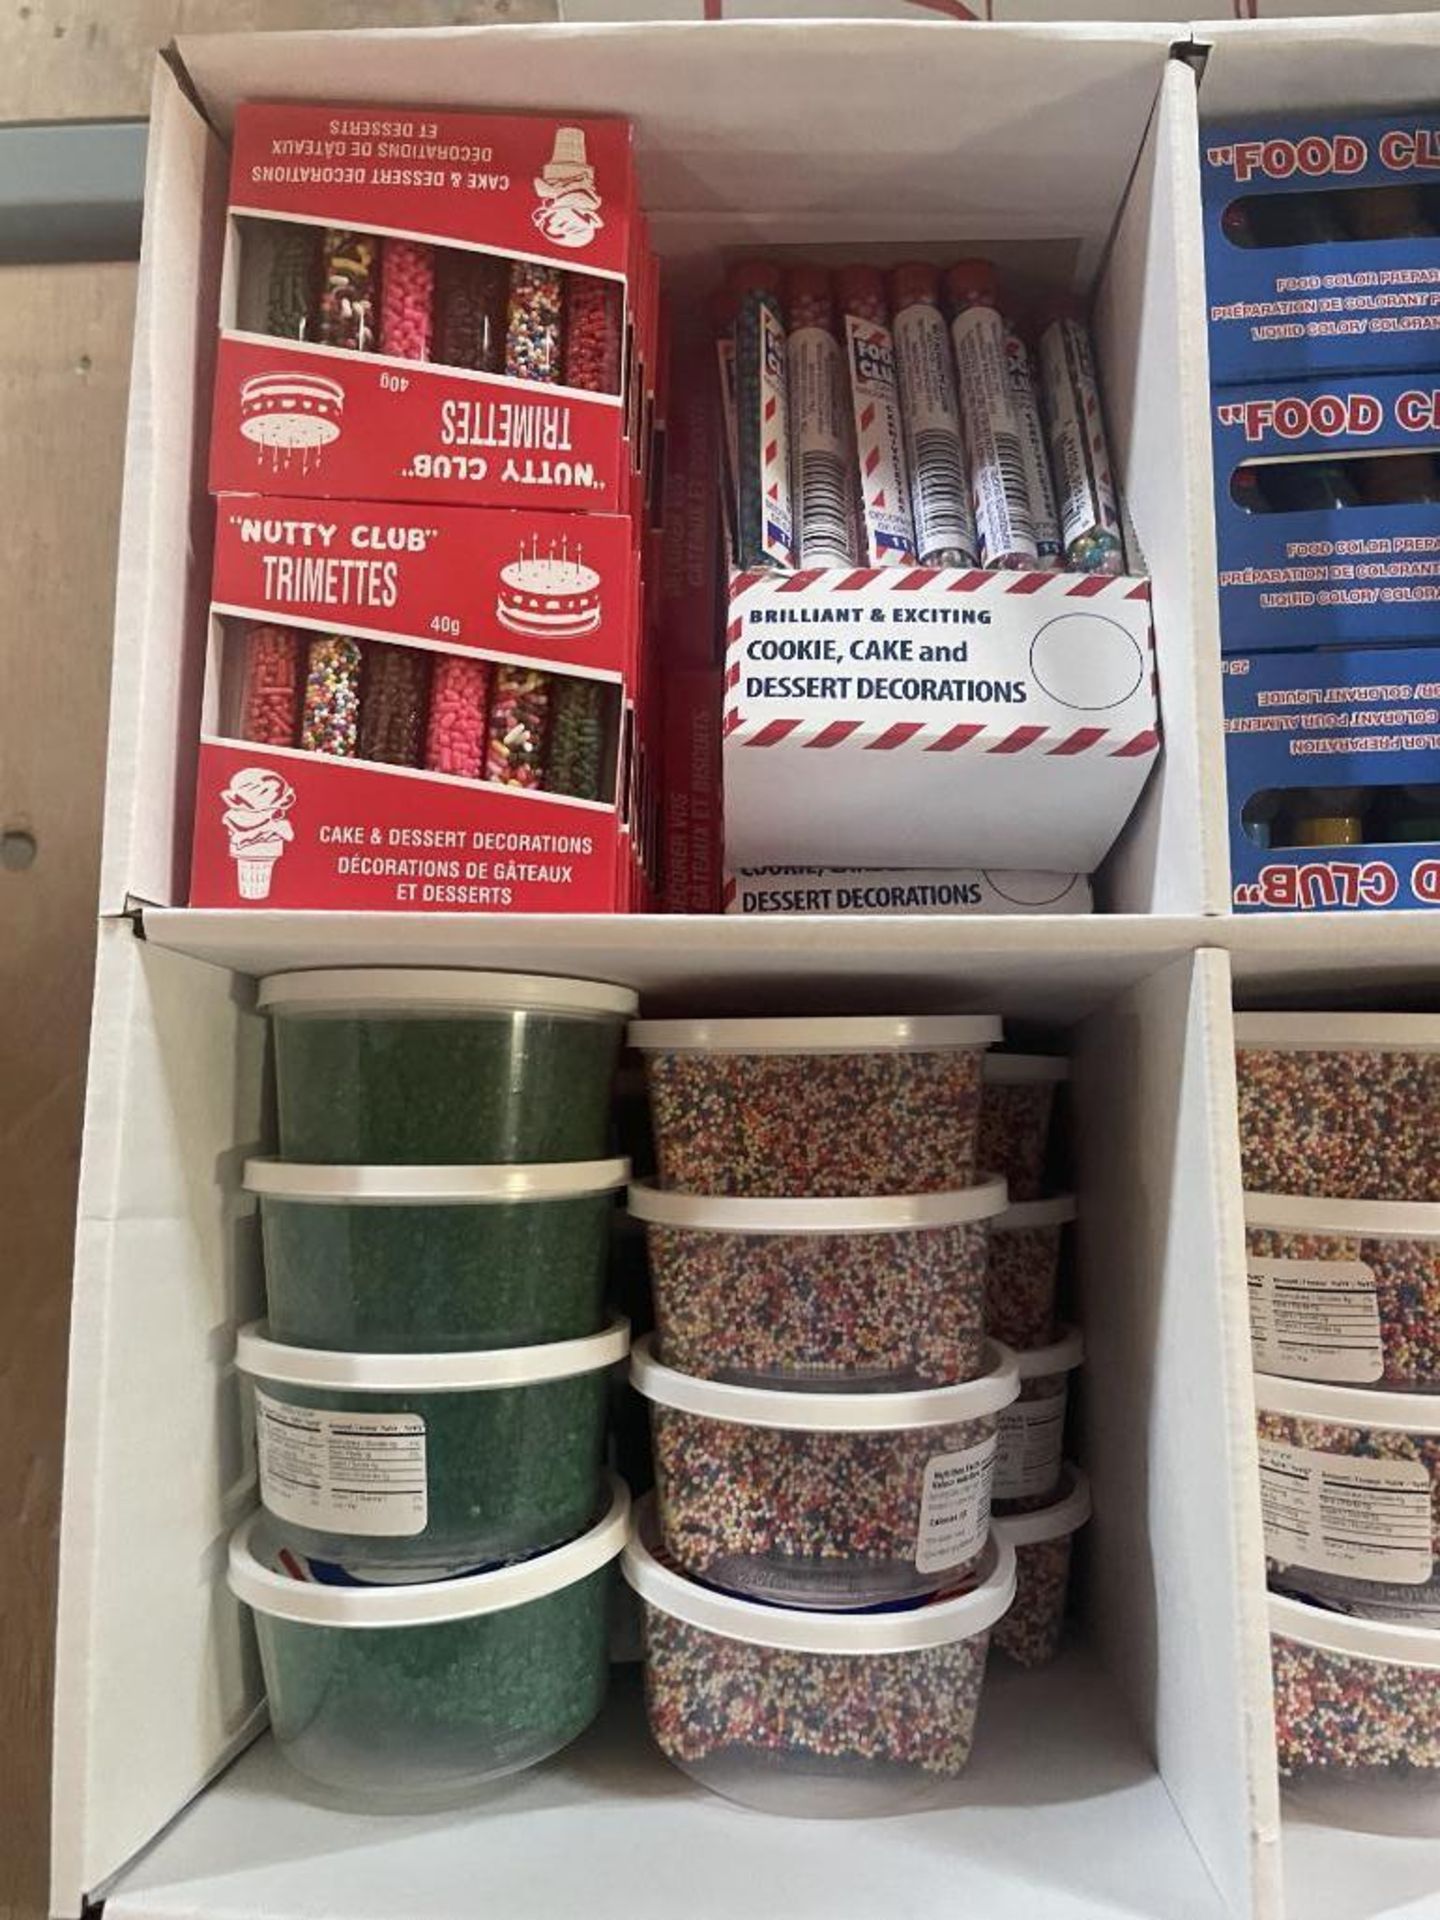 (4) NUTTY CLUB BAKING SUPPLIES FREESTANDING RETAIL DISPLAY - Image 4 of 7